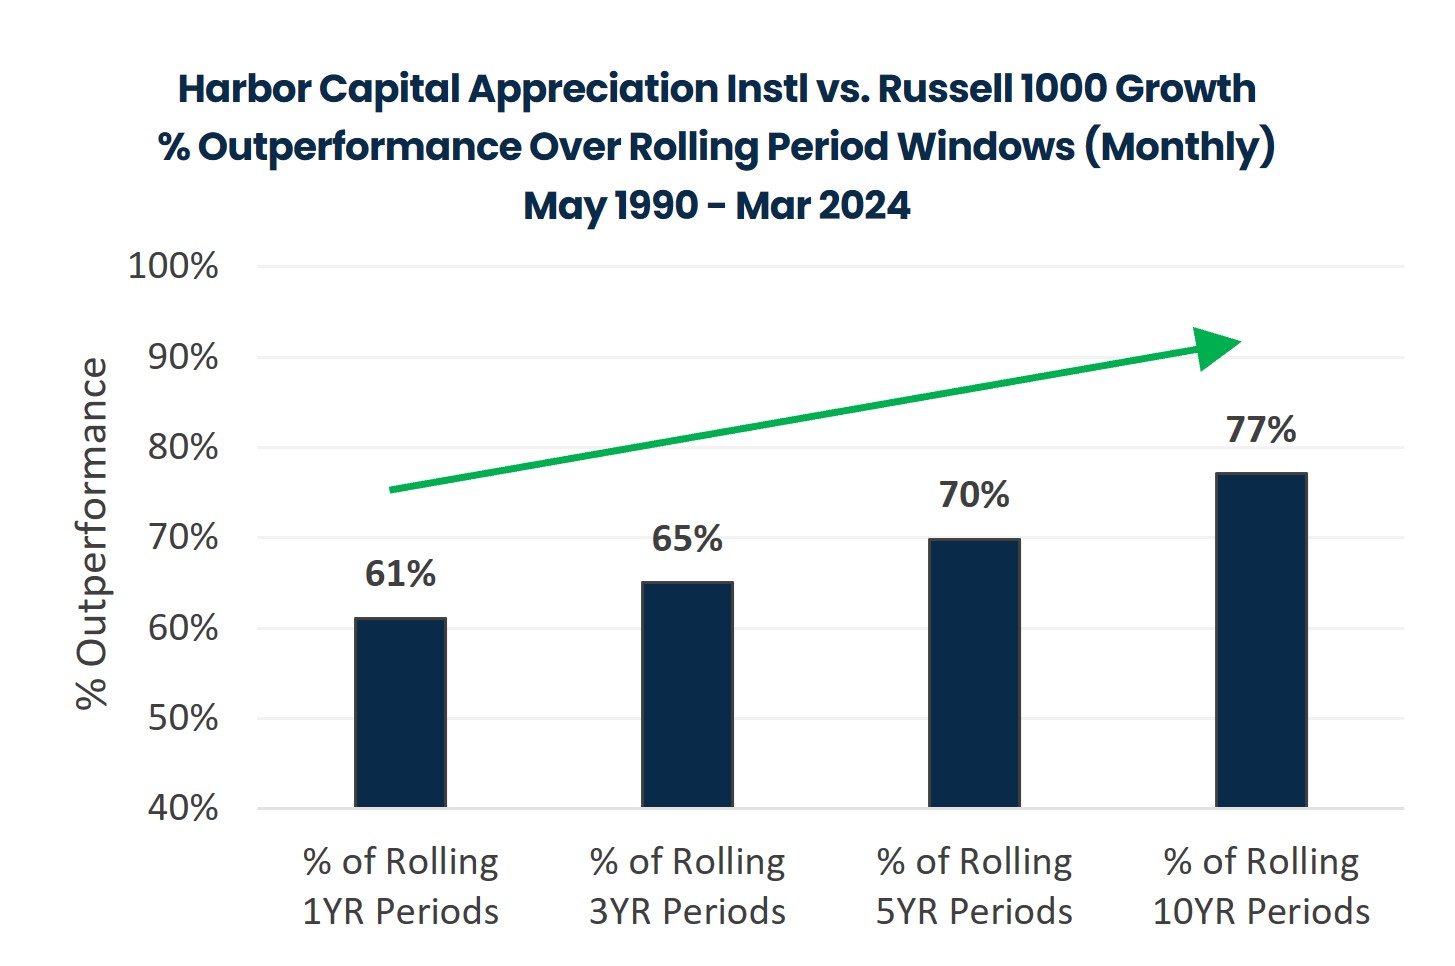 Harbor Capital Appreciation Instl vs. Russell 1000 Growth % Outperformance Over Rolling Period Windows (Monthly) May 1990 - Mar 2024